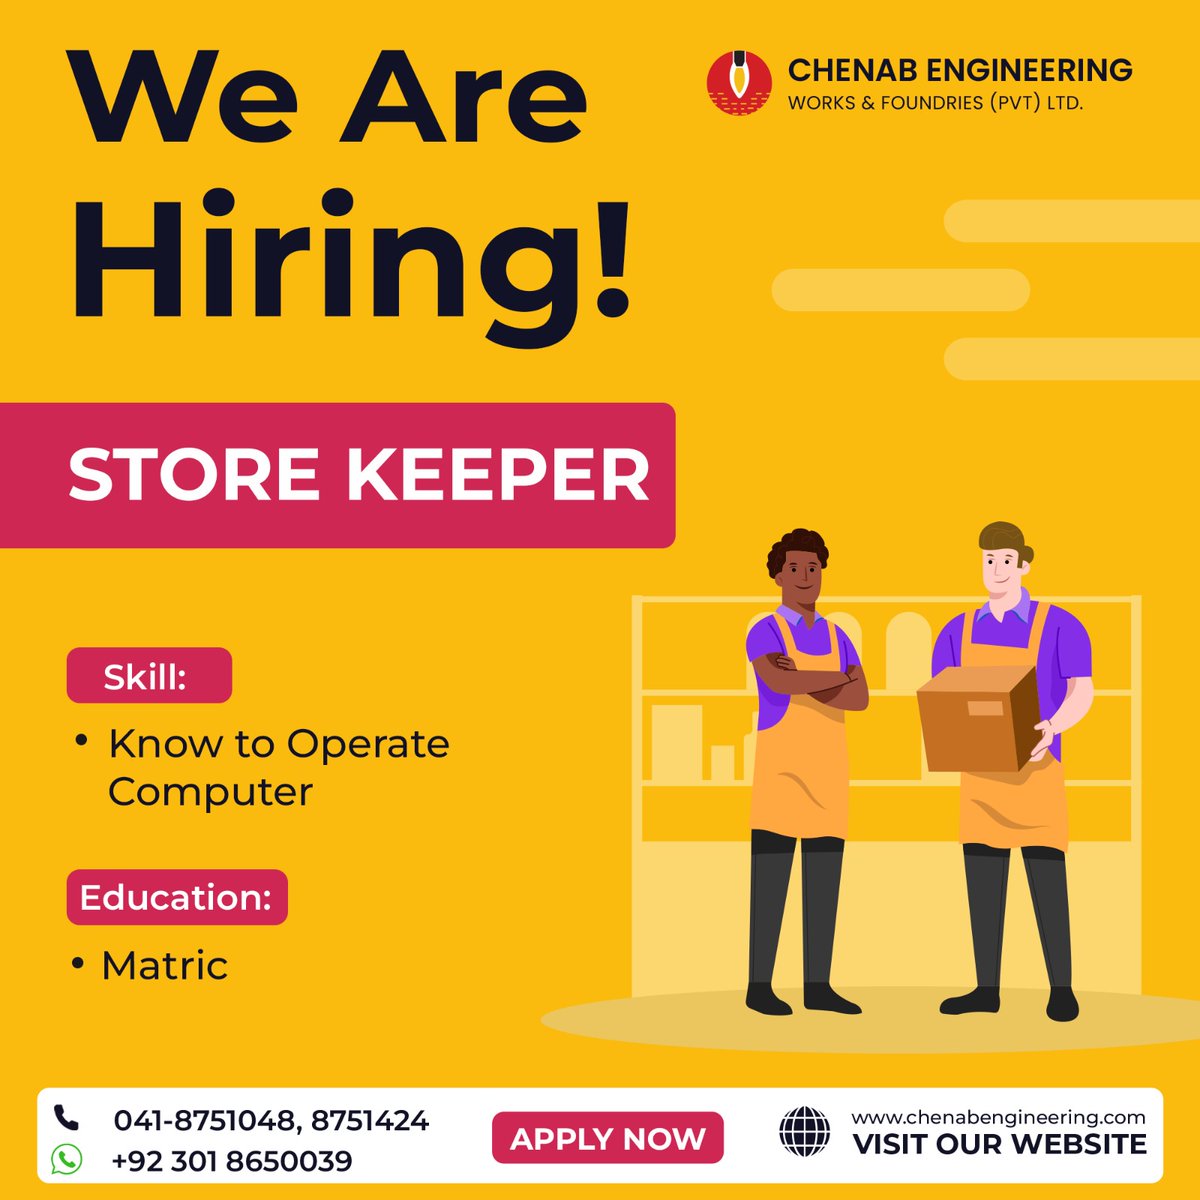 HIRING STOREKEEPER | JOB ALERT
Join our team as a Storekeeper and put your skills to good use. Interested?

Apply Now
.

.
.
#JobAlert #NewJobs #StorekeeperJob #JobOpportunity #StorekeeperHiring #NowHiring #StorekeeperPosition #StoreManagement #ApplyNow #JobsInFaisalabad #Matric